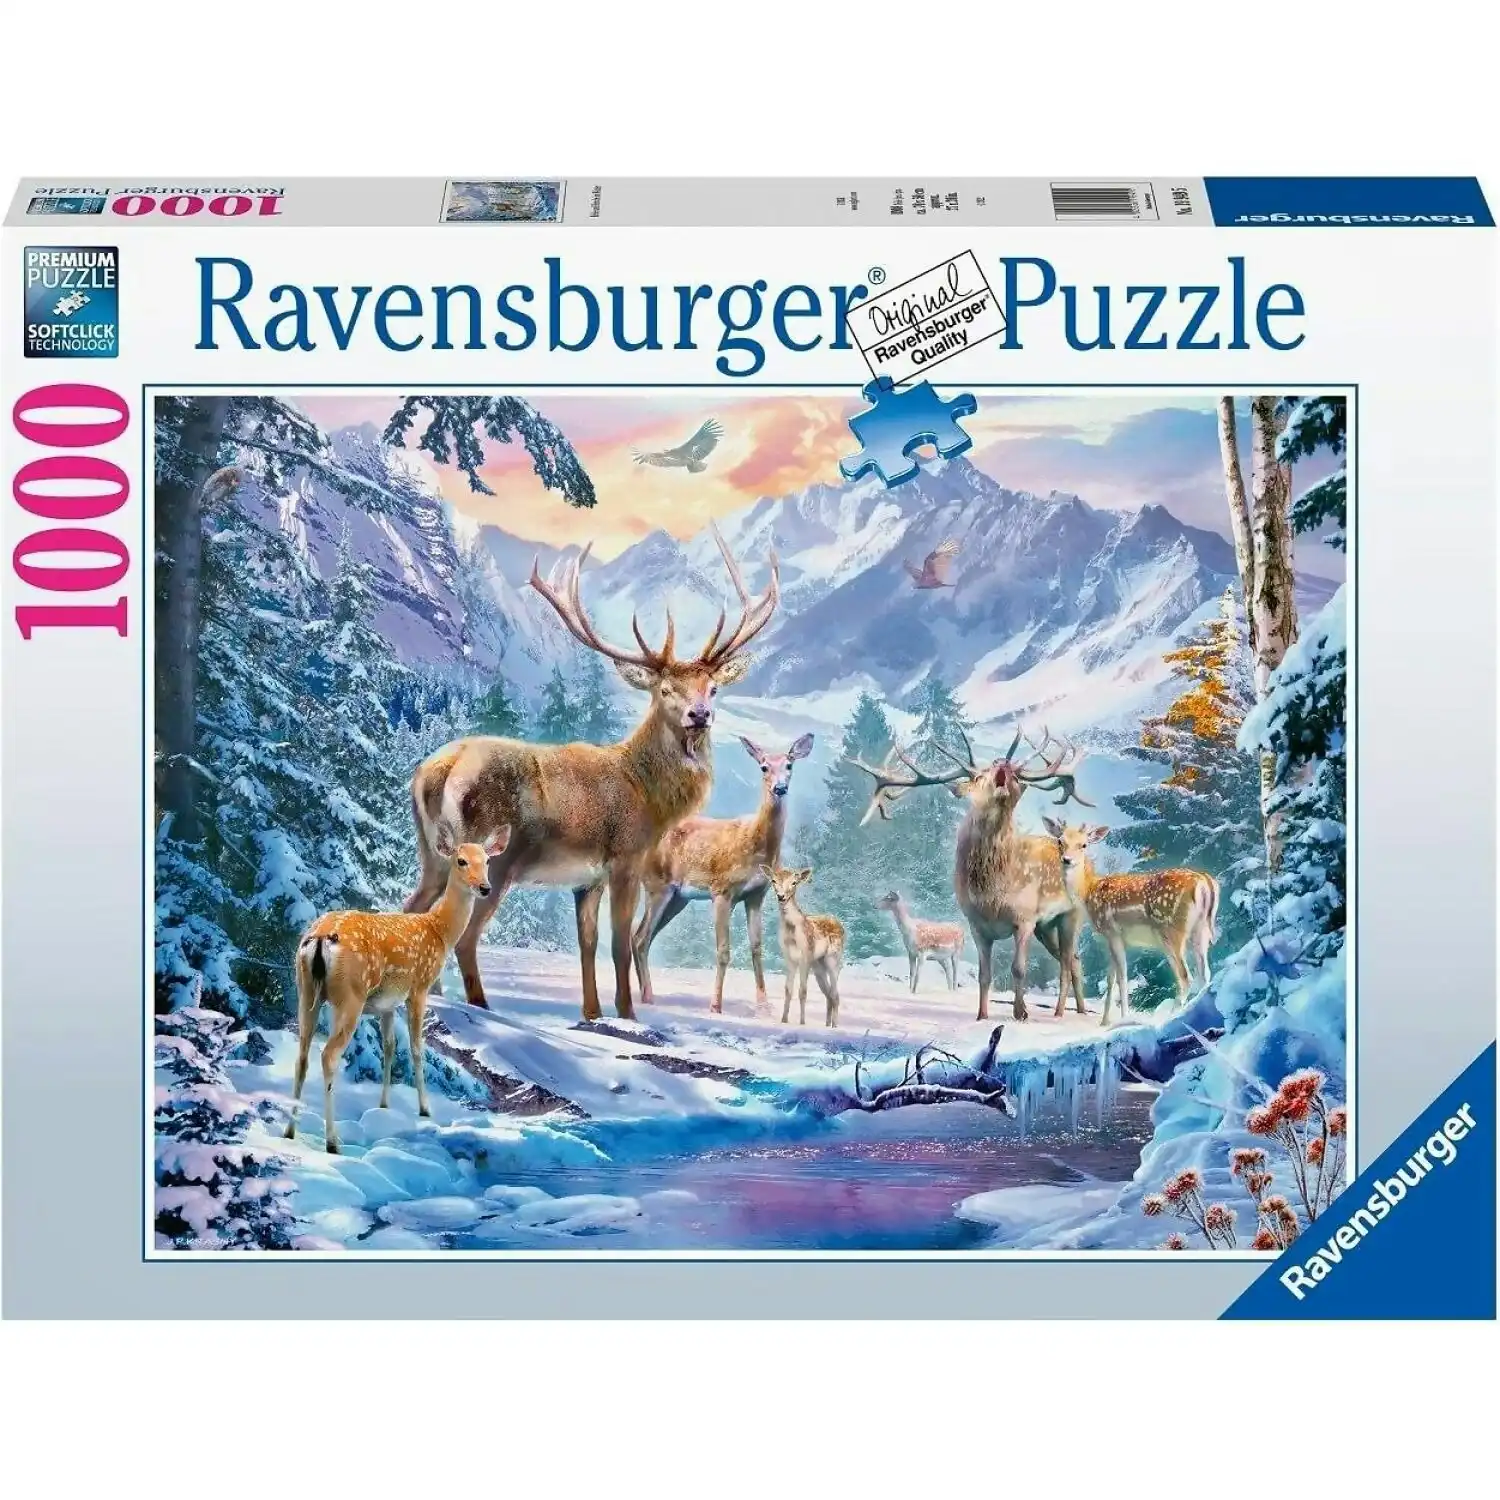 Ravensburger - Deer And Stags In Winter Puzzle Jigsaw Puzzle 1000pc